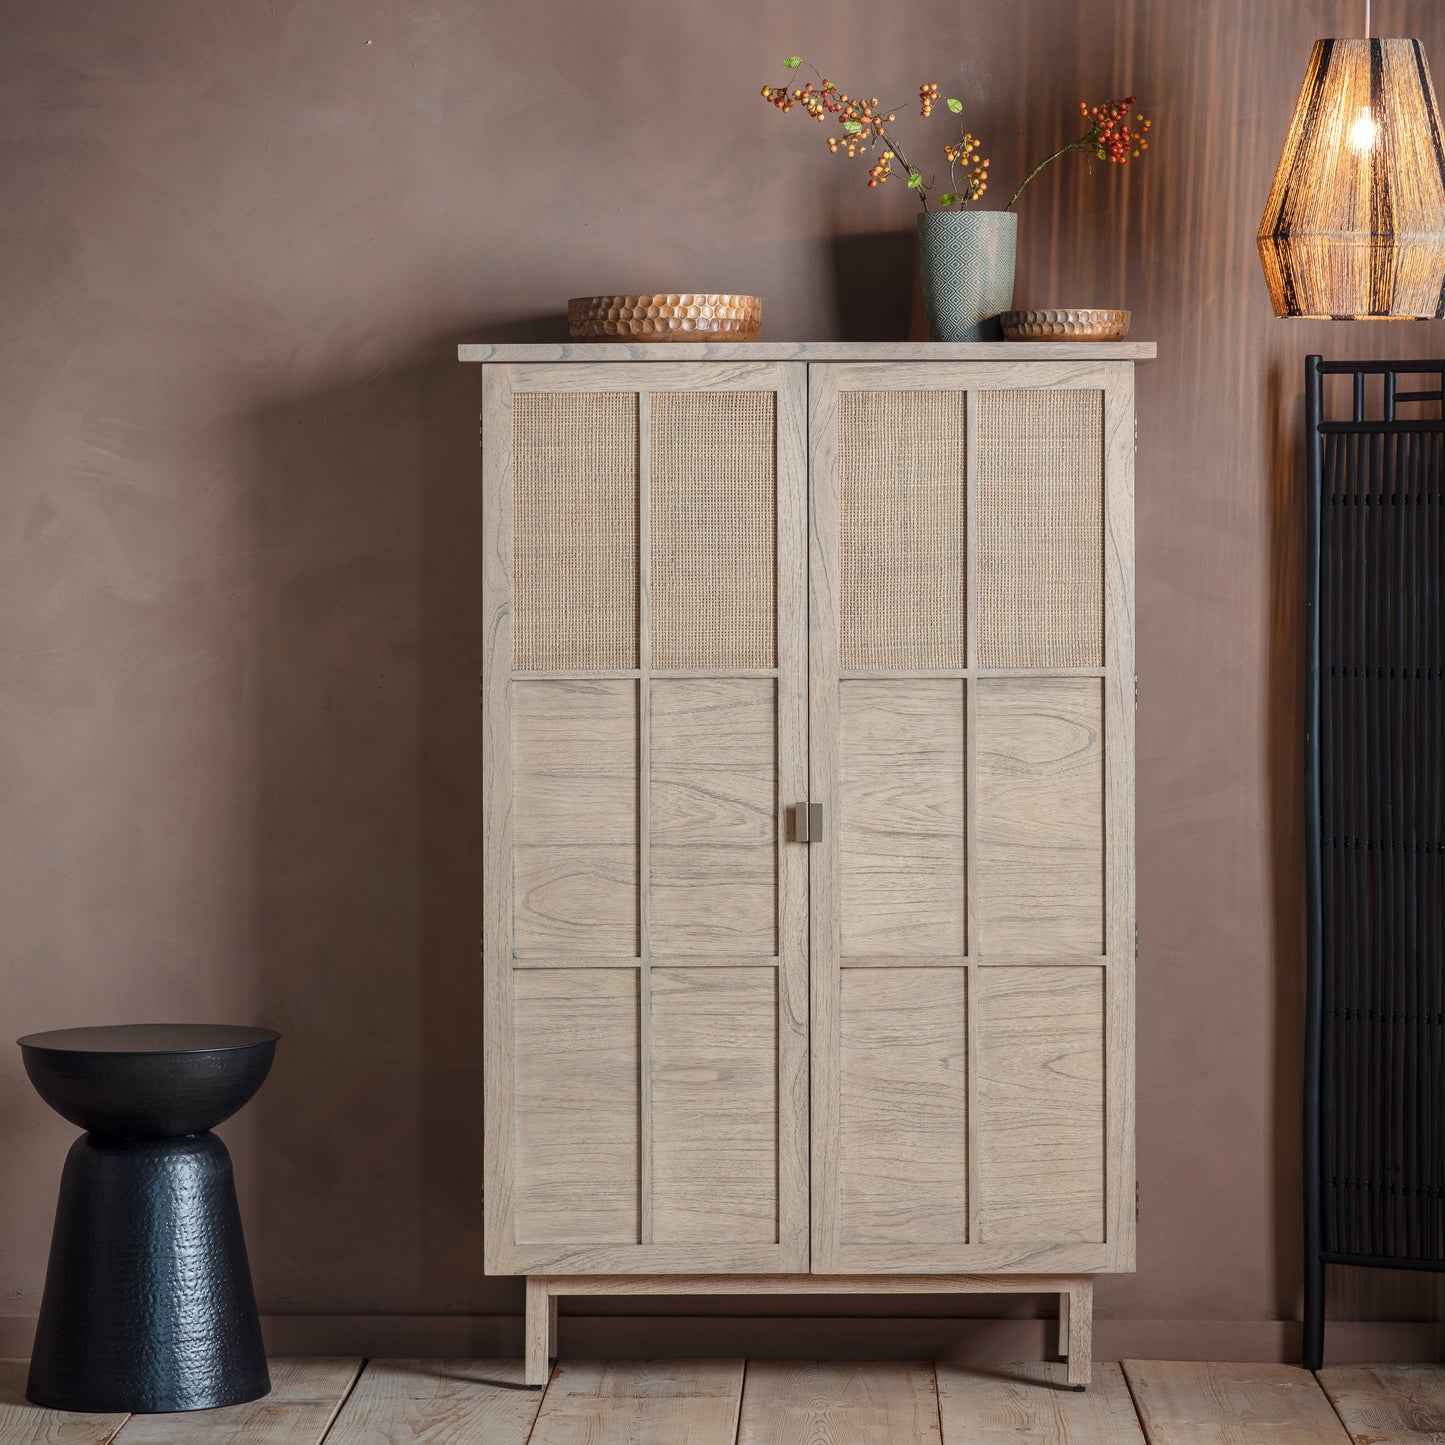 An Alvington 2 Door Cupboard from Kikiathome.co.uk adding elegance and functionality to your home interior decor.